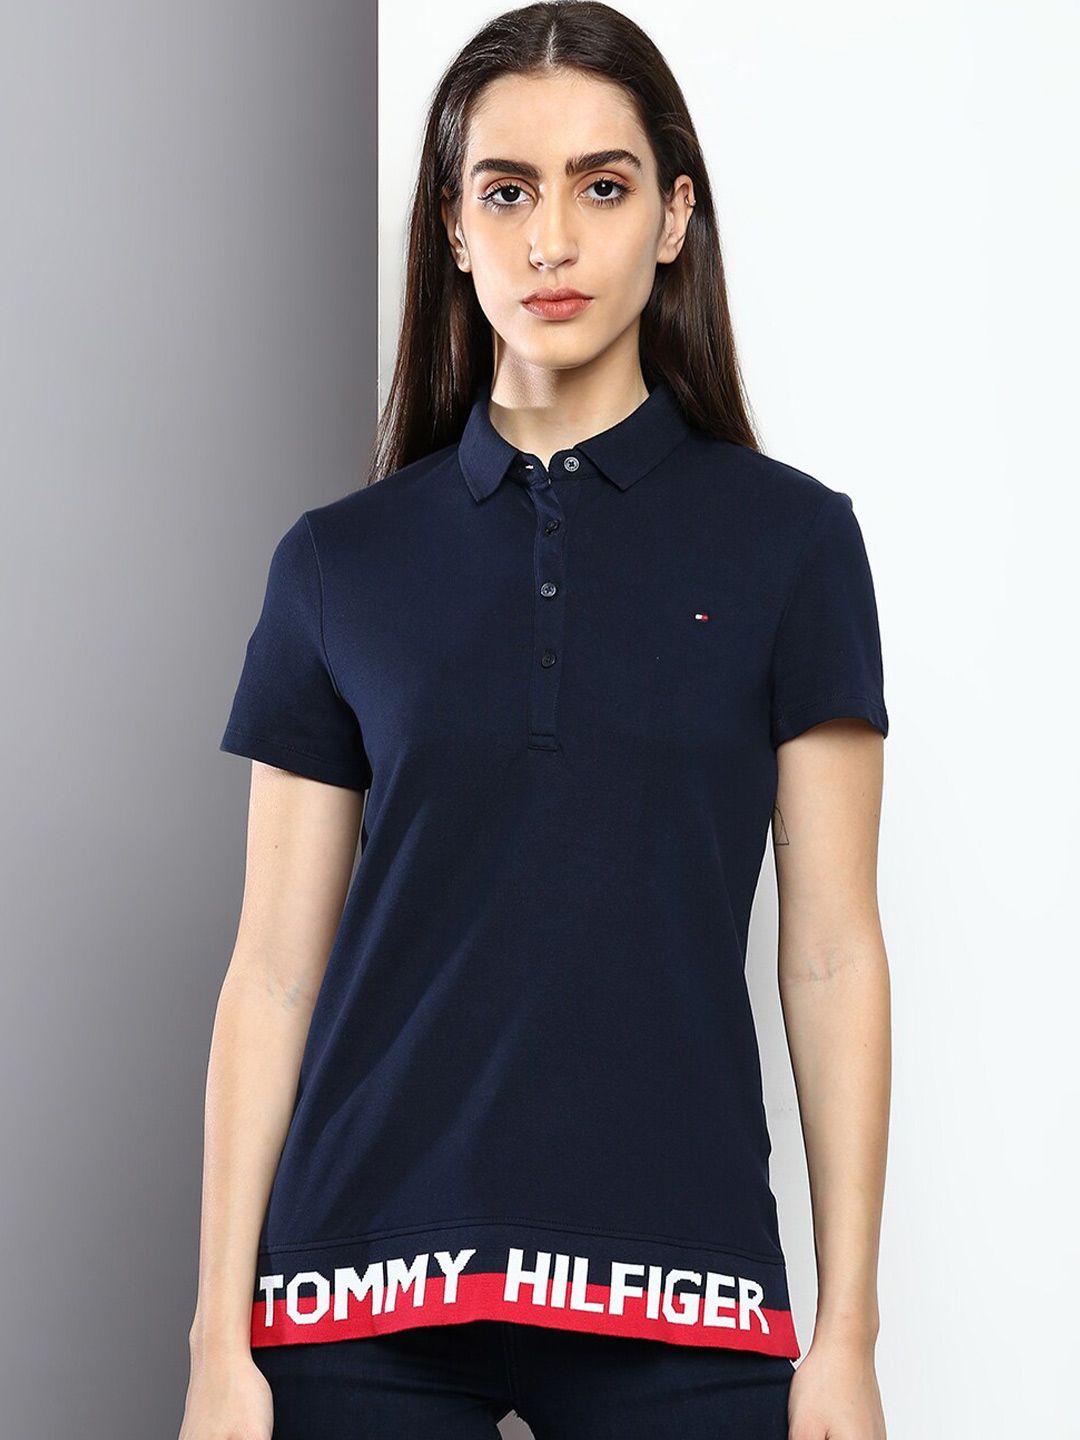 tommy-hilfiger-women-navy-blue-&-white-typography-printed-polo-collar-t-shirt